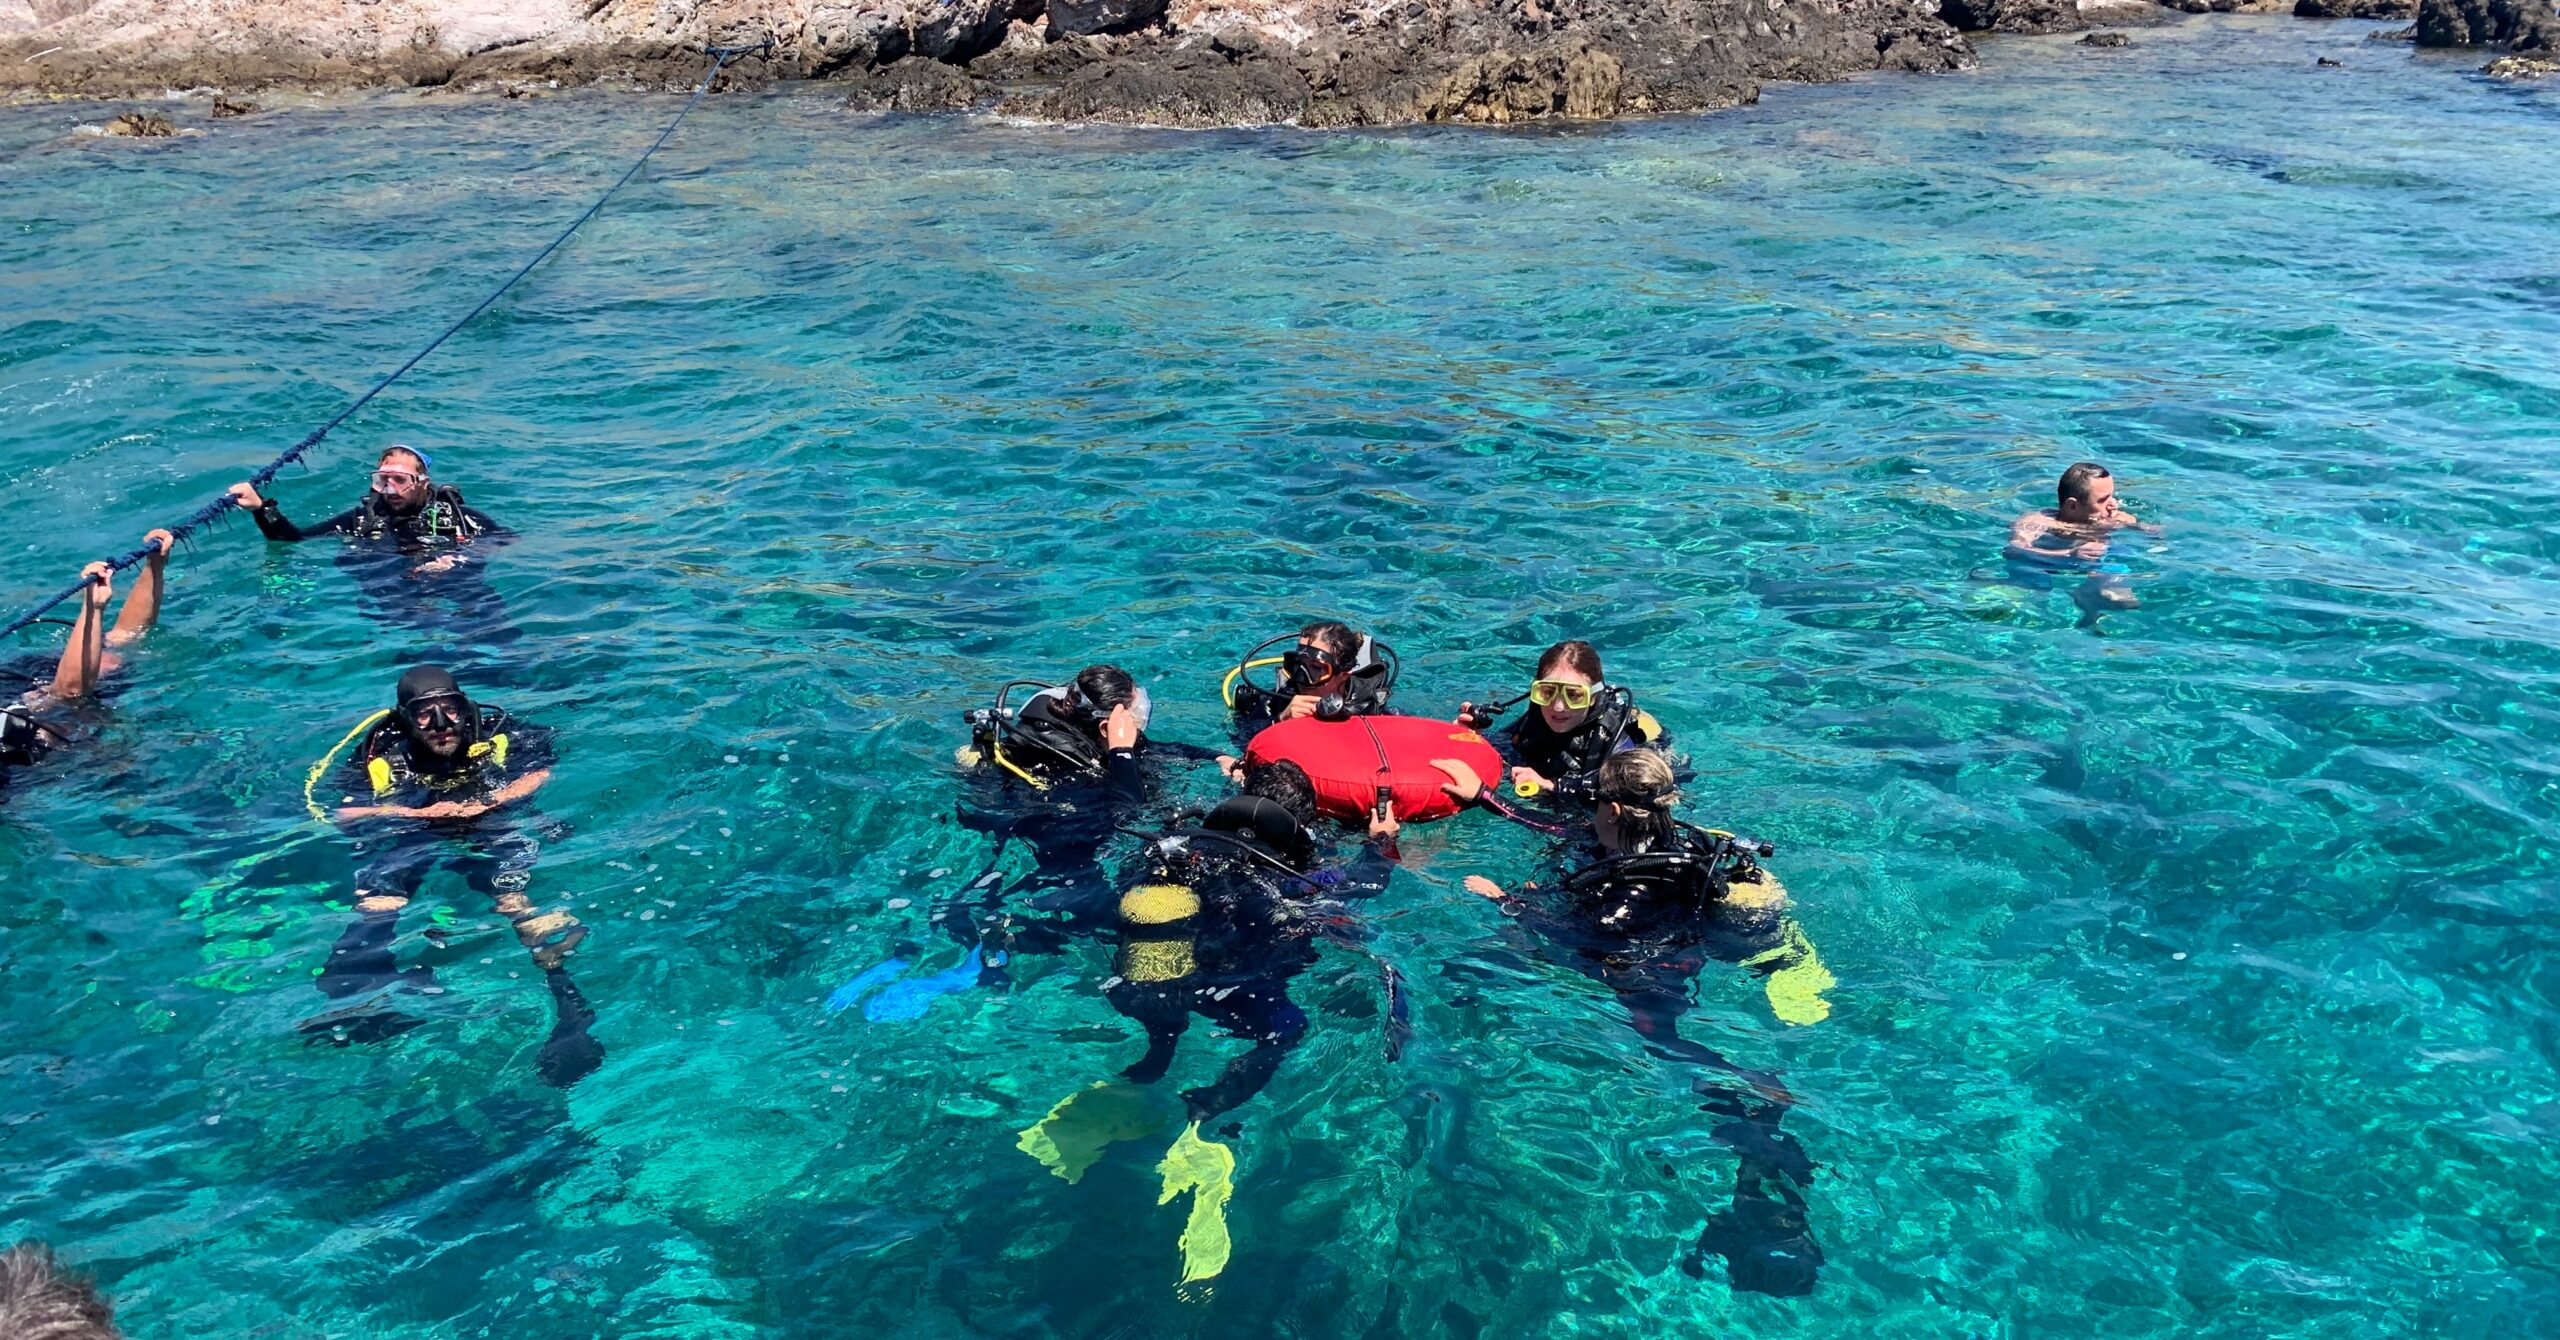 Diving Experience In The Heart Of Red Sea In Aqaba - Jordan MW Tours